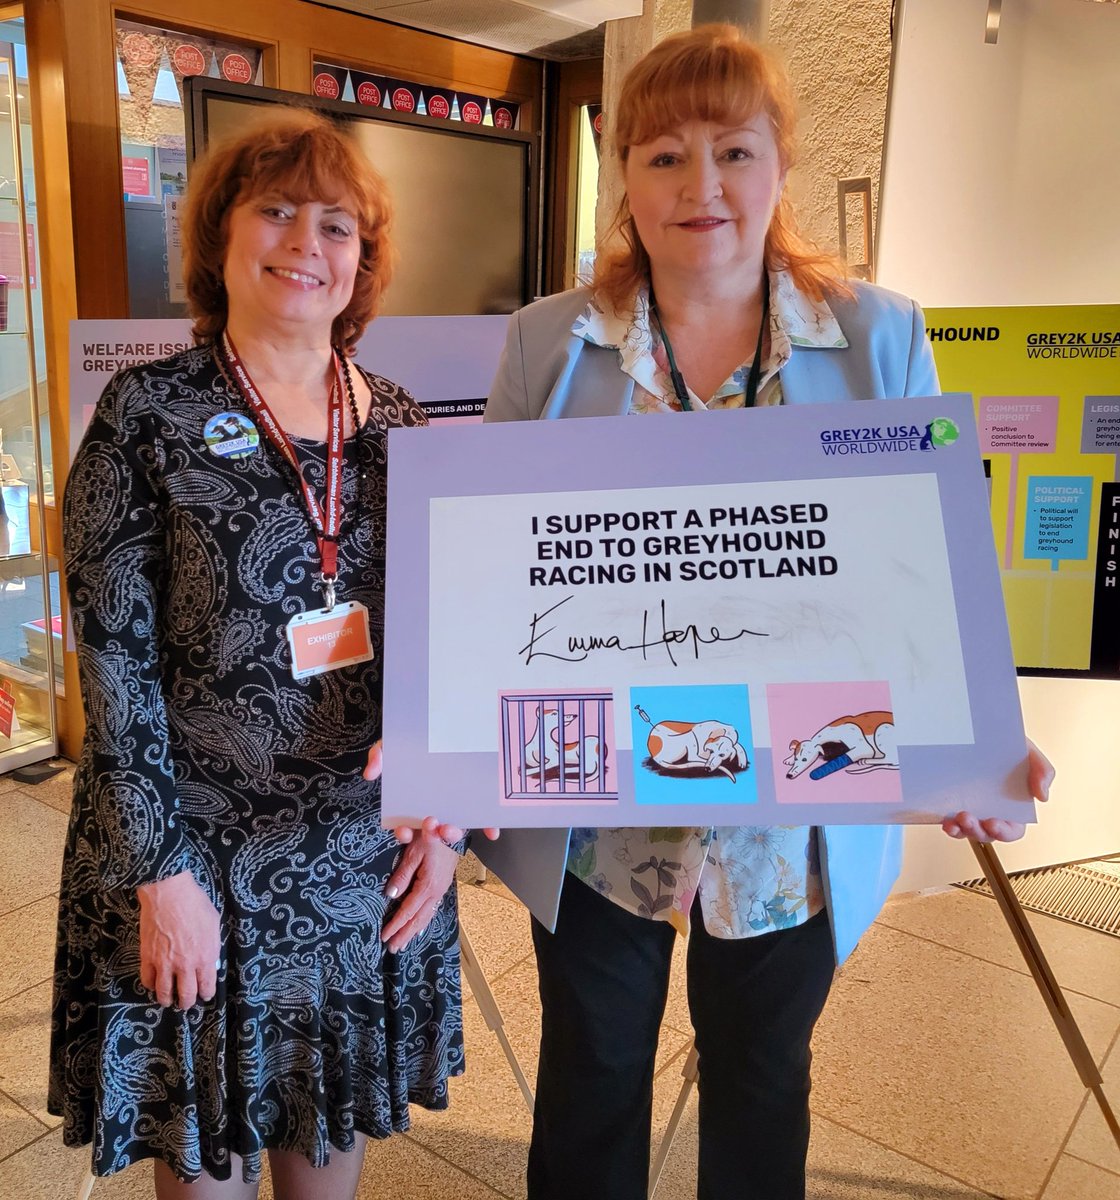 We were so pleased to speak with @EmmaHarperMSP this morning about greyhounds, and her work to protect dogs and other animals.

Together, we can phase out greyhound racing in Scotland!

#UnboundTheHound